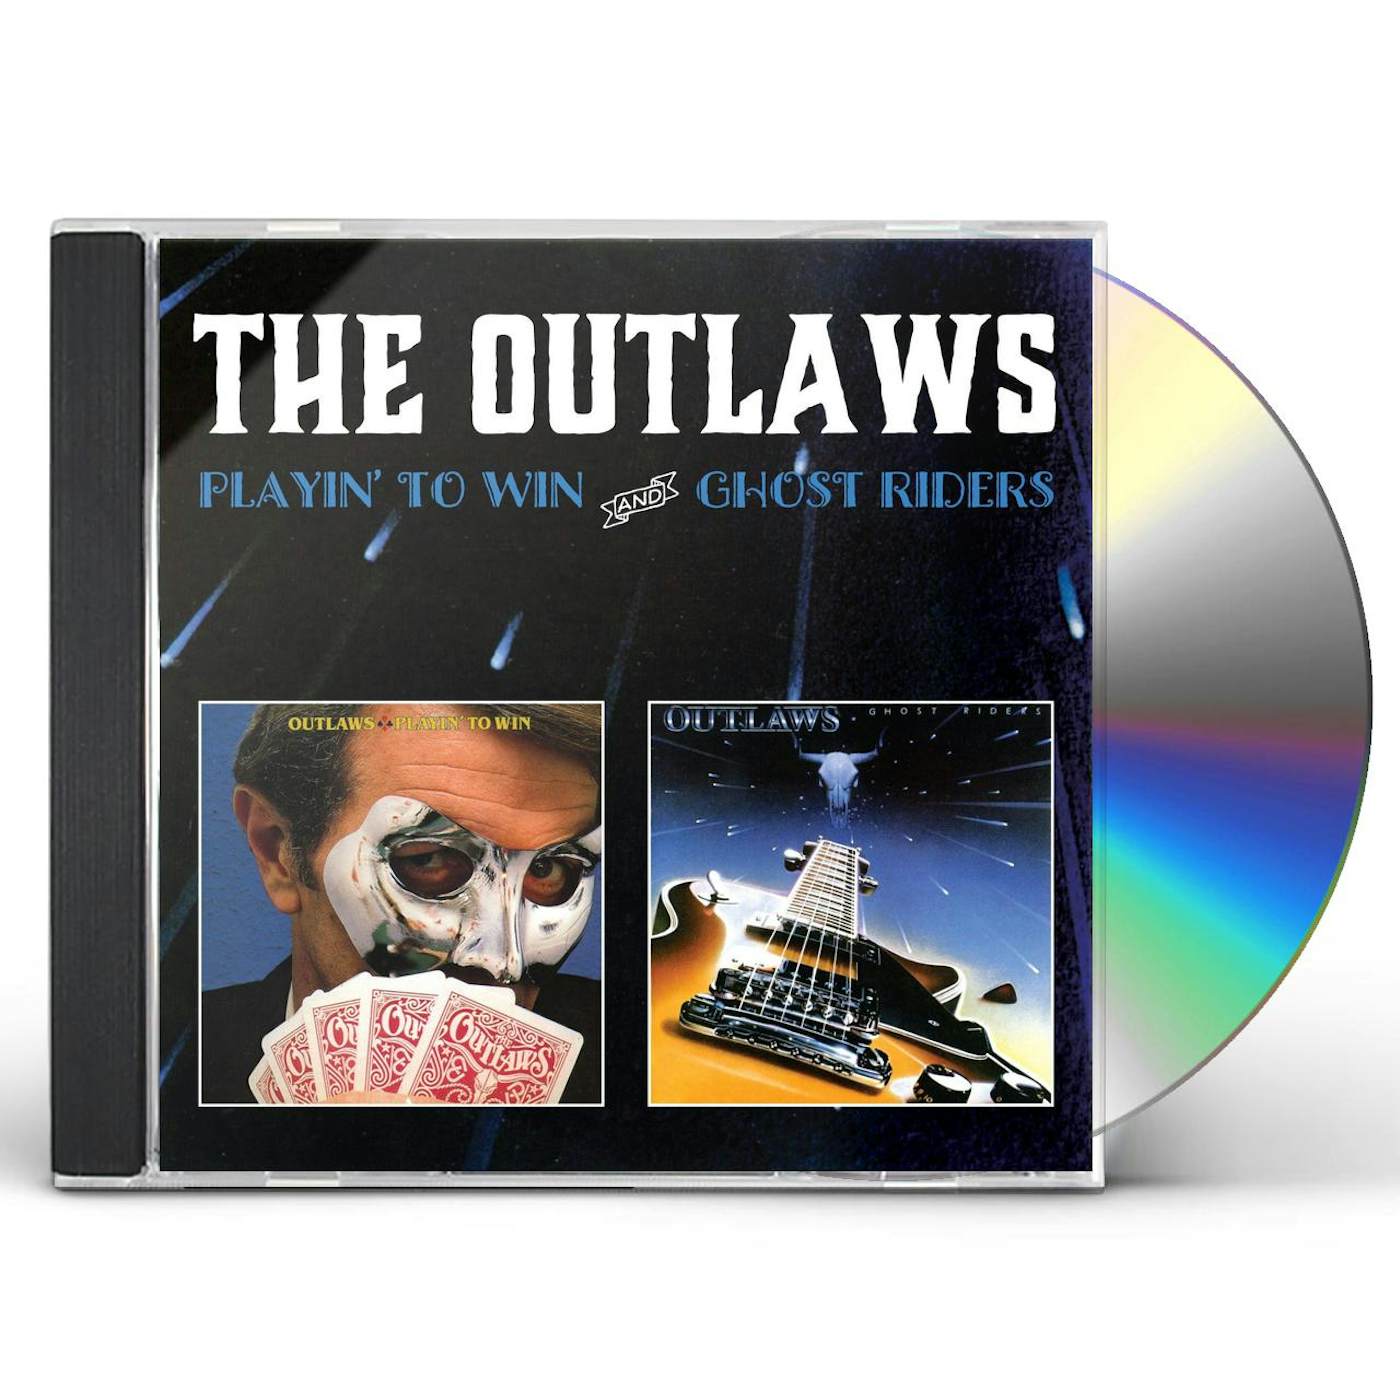 Outlaws PLAYIN TO WIN / GHOST RIDERS CD